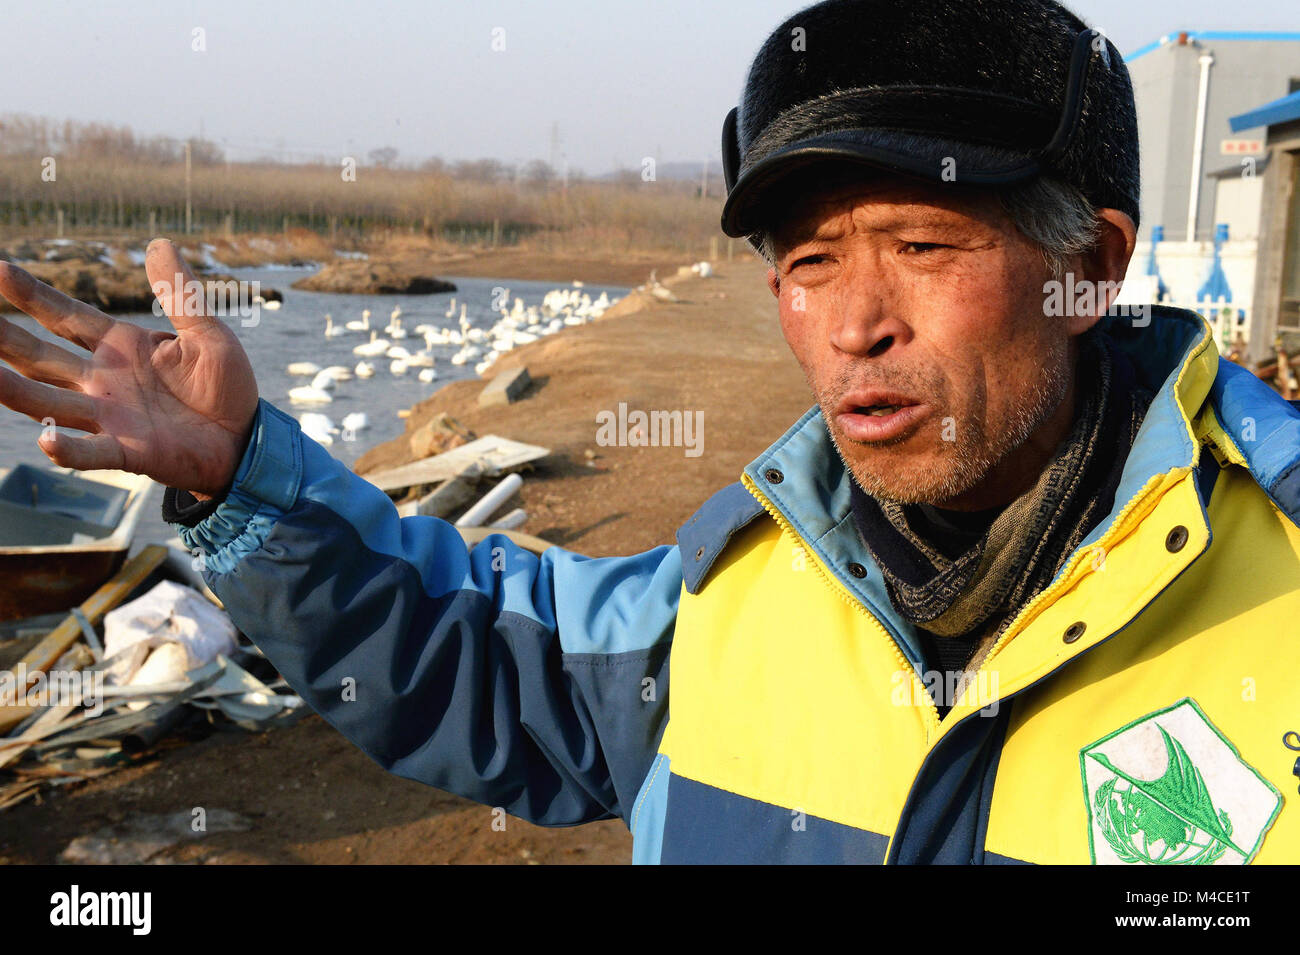 (180216) -- JINAN, Feb. 16, 2018 (Xinhua) -- Yuan Xueshun tells his story of feeding swans in Chengshan Town of Rongcheng City, east China's Shandong Province, Feb. 14, 2018. Yuan Xueshun, dubbed as 'swan guard,' has devoted himeself to the protection of swans for over 40 years. He has rescued more than 1,000 sick or wounded swans and succeeded in preventing more than 1,000 mu (66.67 hectares) of wetland from being destroyed since 1975. Thanks to the efforts made by people like Yuan, the Swan Lake in Rongcheng has become an ideal habitat for swans in winter. (Xinhua/Feng Jie) (mp) Stock Photo